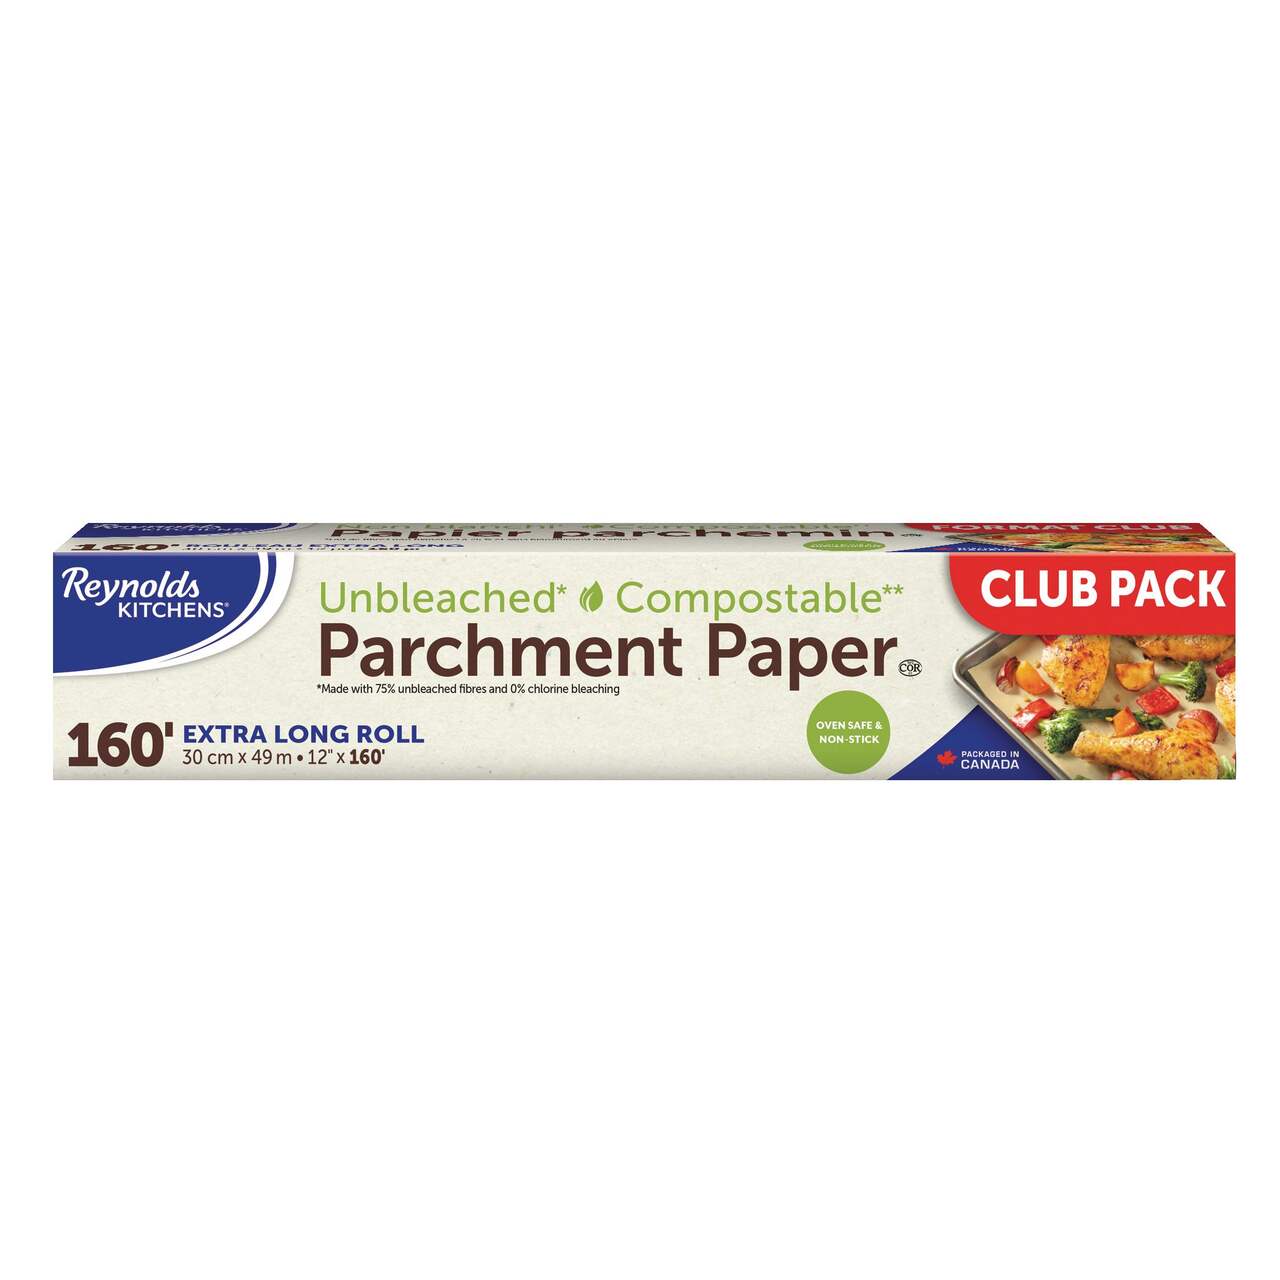 https://media-www.canadiantire.ca/product/living/home-essentials/household-consumables/1531868/reynolds-unbleached-parchment-paper-160--a3b84a5c-6c34-4125-bb84-96660738a825-jpgrendition.jpg?imdensity=1&imwidth=640&impolicy=mZoom